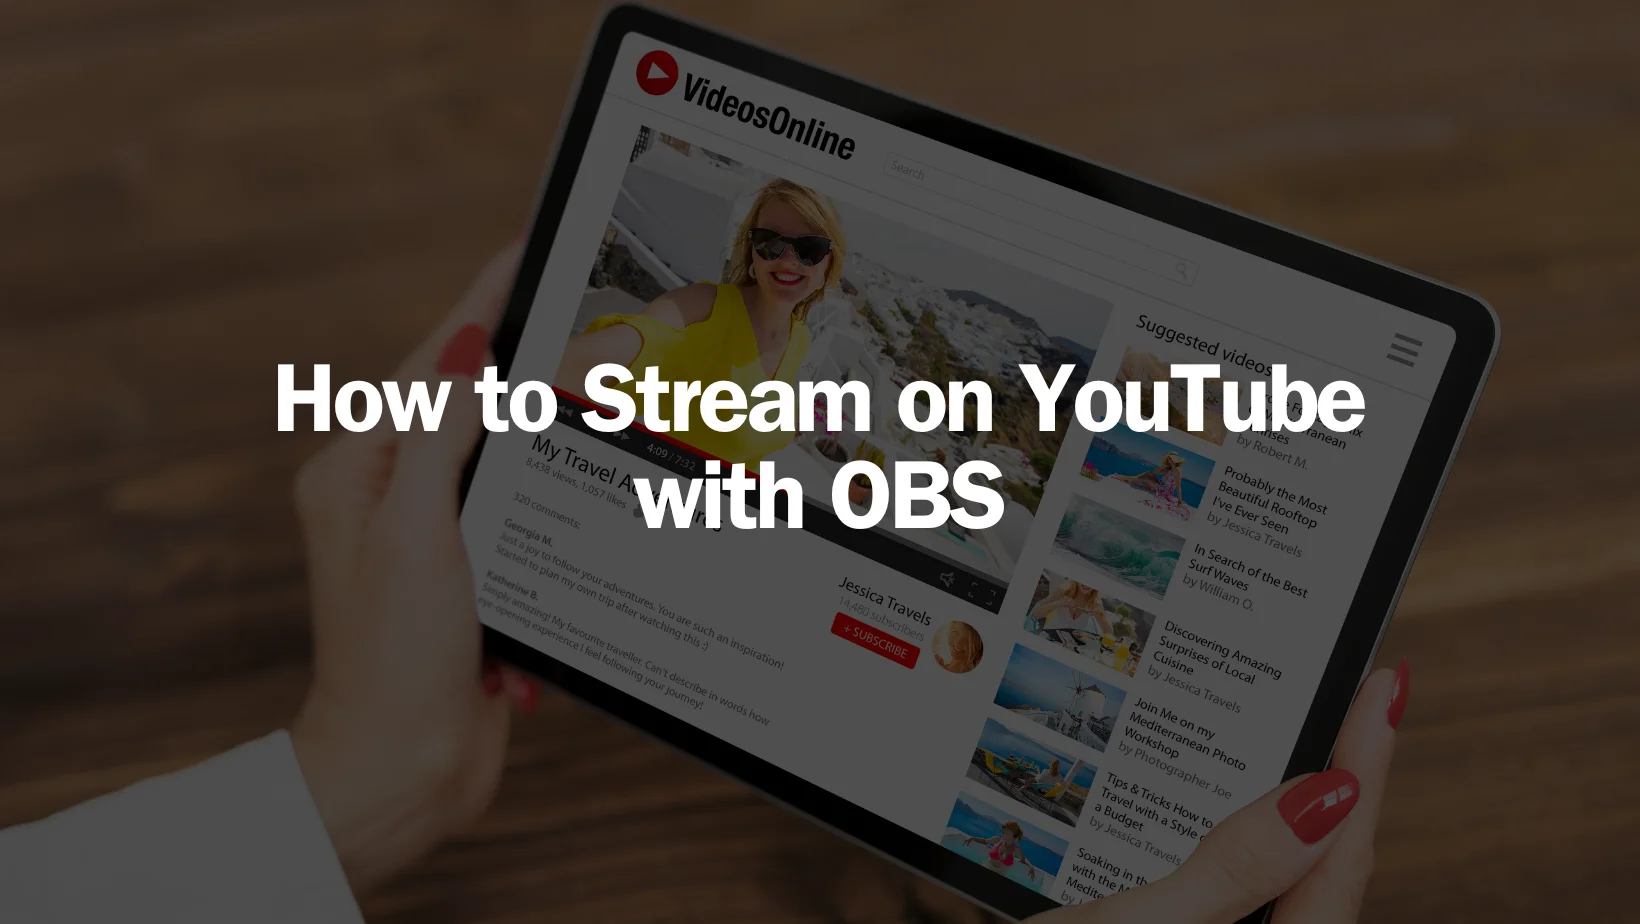 How to Stream on YouTube with OBS